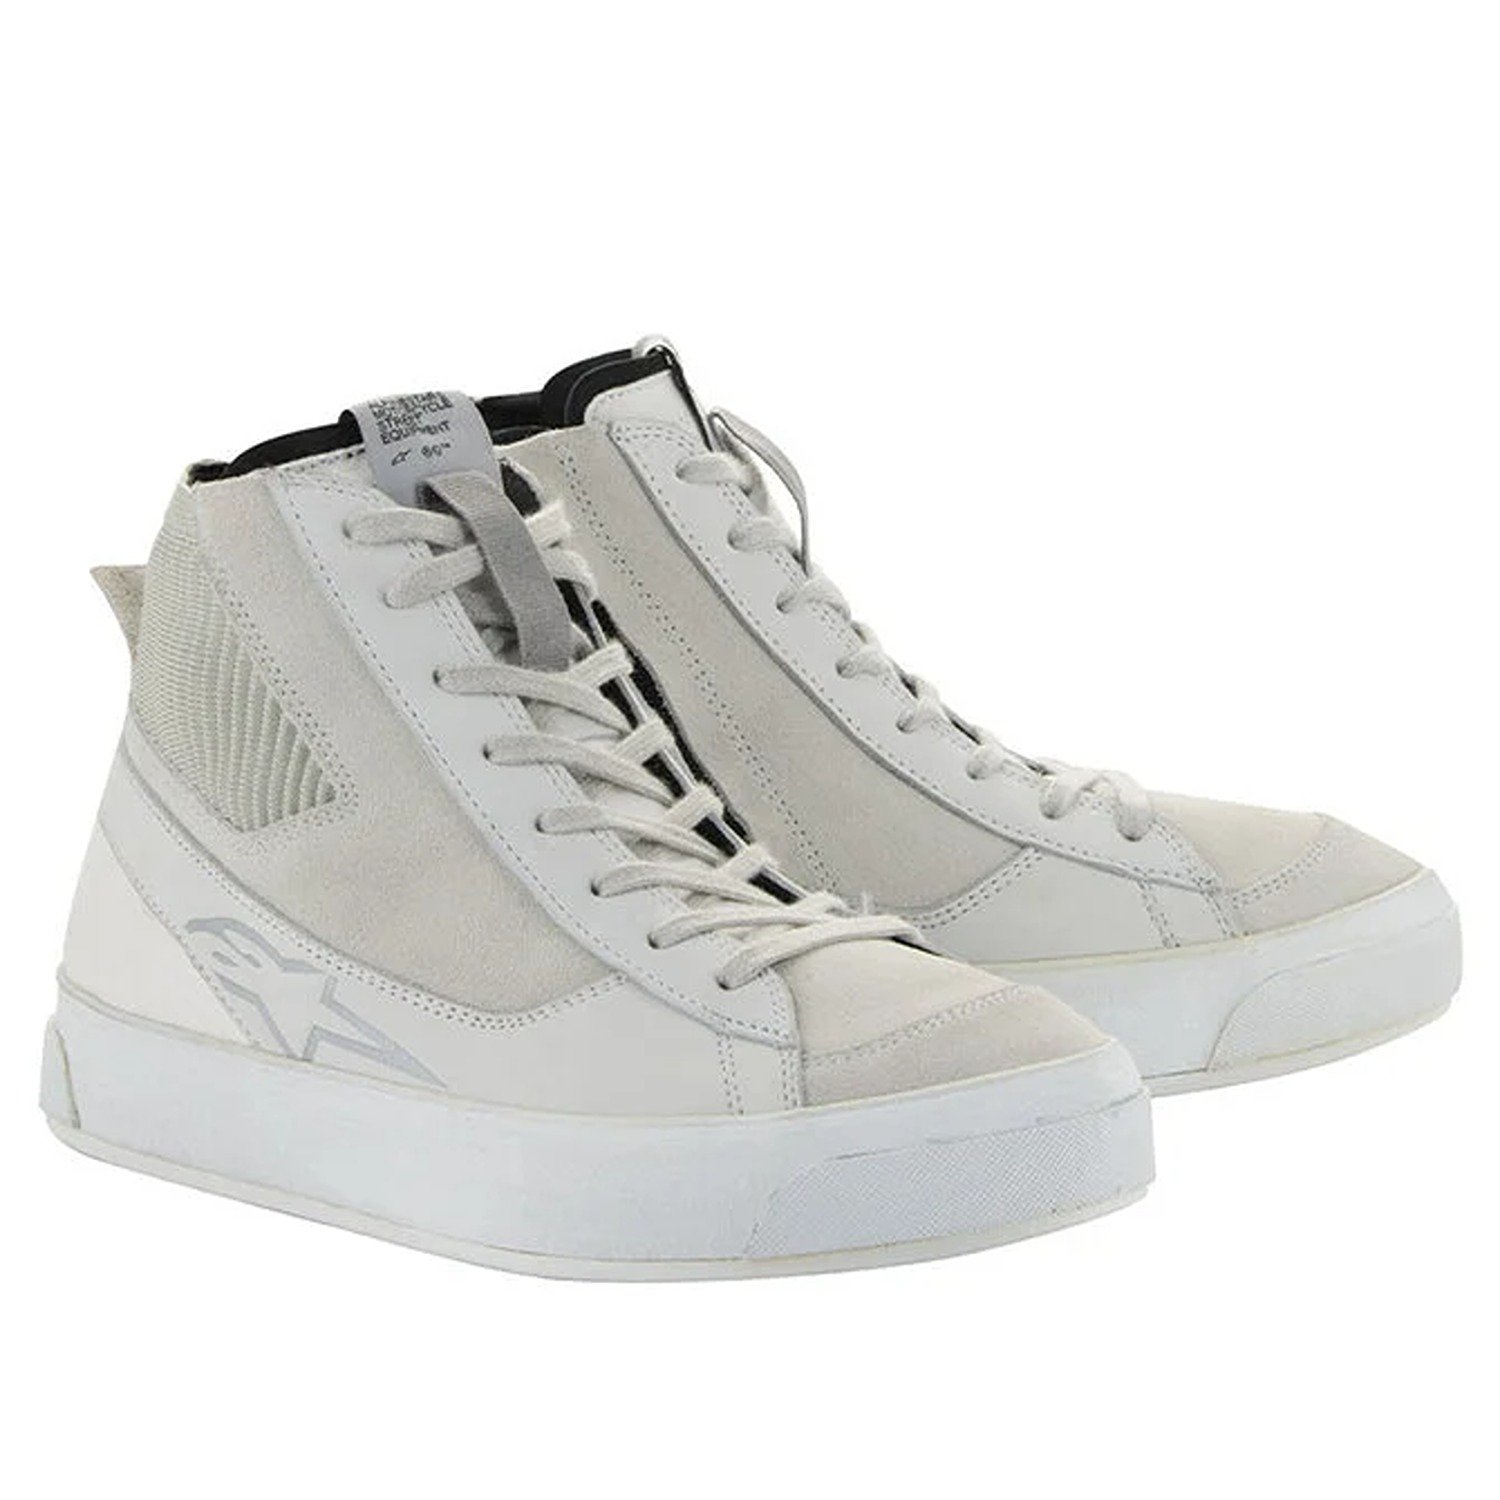 Image of Alpinestars Stated Shoes White Cool Gray Taille US 95